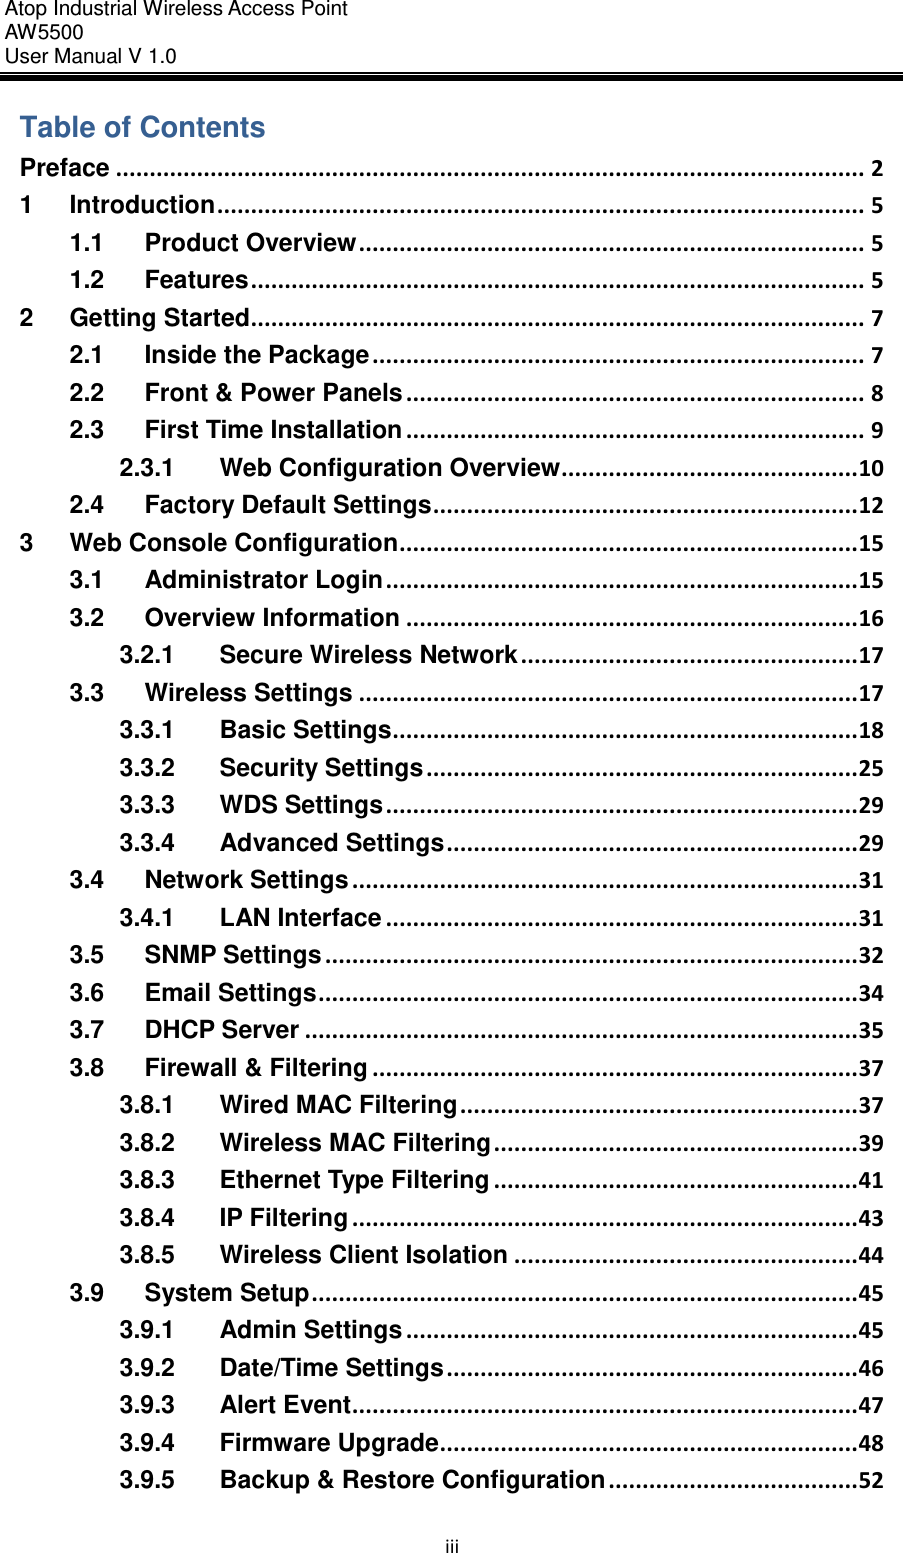 Atop Industrial Wireless Access Point AW 5500 User Manual V 1.0                      iii Table of Contents Preface ............................................................................................................... 2 1 Introduction ................................................................................................ 5 1.1 Product Overview ........................................................................... 5 1.2 Features ........................................................................................... 5 2 Getting Started ........................................................................................... 7 2.1 Inside the Package ......................................................................... 7 2.2 Front &amp; Power Panels .................................................................... 8 2.3 First Time Installation .................................................................... 9 2.3.1 Web Configuration Overview ............................................ 10 2.4 Factory Default Settings ............................................................... 12 3 Web Console Configuration .................................................................... 15 3.1 Administrator Login ...................................................................... 15 3.2 Overview Information ................................................................... 16 3.2.1 Secure Wireless Network .................................................. 17 3.3 Wireless Settings .......................................................................... 17 3.3.1 Basic Settings ..................................................................... 18 3.3.2 Security Settings ................................................................ 25 3.3.3 WDS Settings ...................................................................... 29 3.3.4 Advanced Settings ............................................................. 29 3.4 Network Settings ........................................................................... 31 3.4.1 LAN Interface ...................................................................... 31 3.5 SNMP Settings ............................................................................... 32 3.6 Email Settings ................................................................................ 34 3.7 DHCP Server .................................................................................. 35 3.8 Firewall &amp; Filtering ........................................................................ 37 3.8.1 Wired MAC Filtering ........................................................... 37 3.8.2 Wireless MAC Filtering ...................................................... 39 3.8.3 Ethernet Type Filtering ...................................................... 41 3.8.4 IP Filtering ........................................................................... 43 3.8.5 Wireless Client Isolation ................................................... 44 3.9 System Setup ................................................................................. 45 3.9.1 Admin Settings ................................................................... 45 3.9.2 Date/Time Settings ............................................................. 46 3.9.3 Alert Event ........................................................................... 47 3.9.4 Firmware Upgrade .............................................................. 48 3.9.5 Backup &amp; Restore Configuration ..................................... 52 